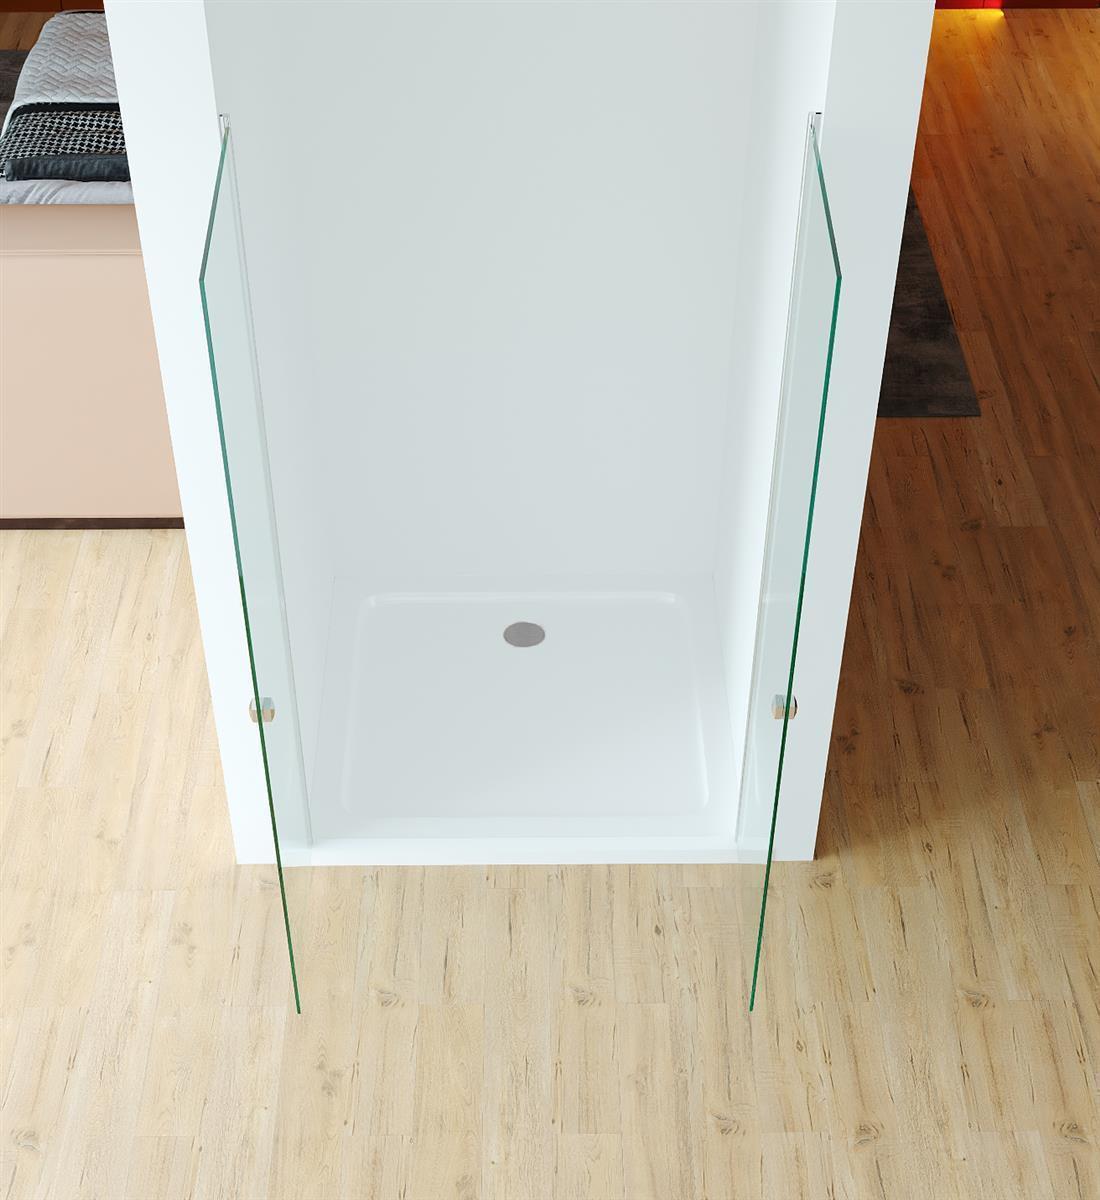 GlasHomeCenter - niche cabin California (80 x 195 cm) - 6mm toughened safety glass - without shower tray